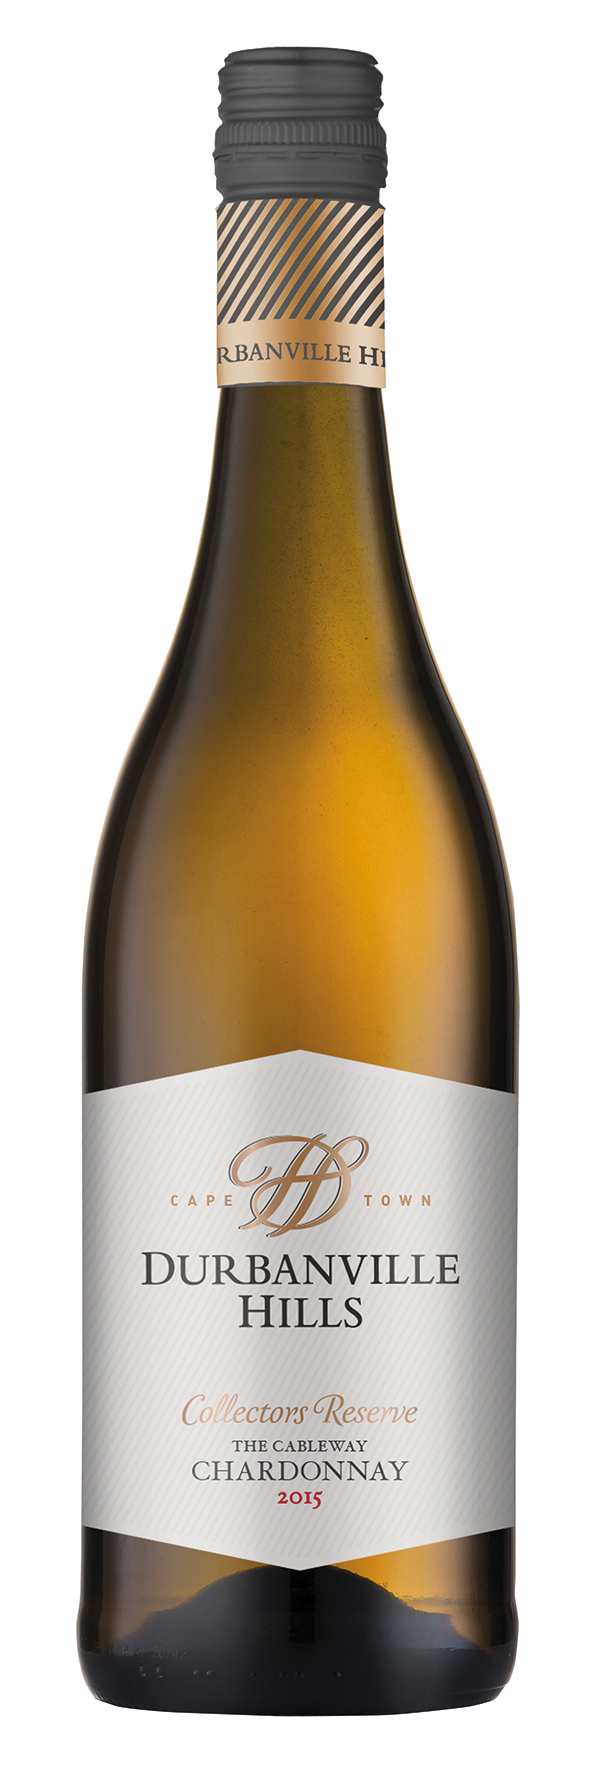 Collector’s Reserve The Cableway Chardonnay